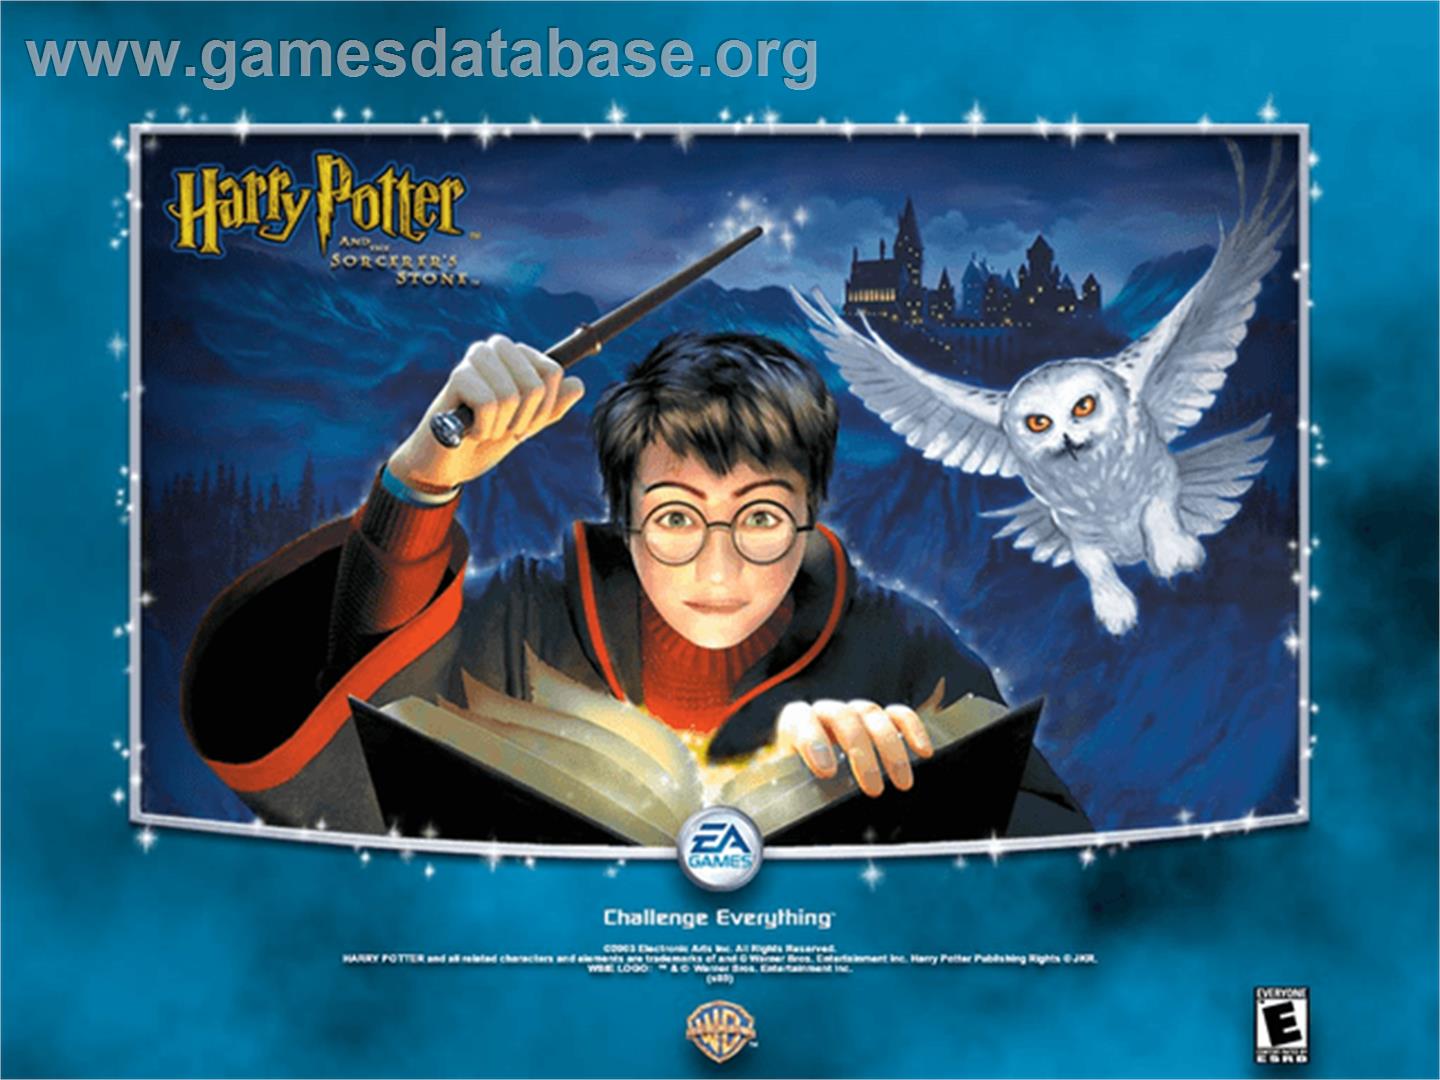 Harry Potter and the Sorcerer's Stone - Microsoft Xbox - Artwork - Title Screen